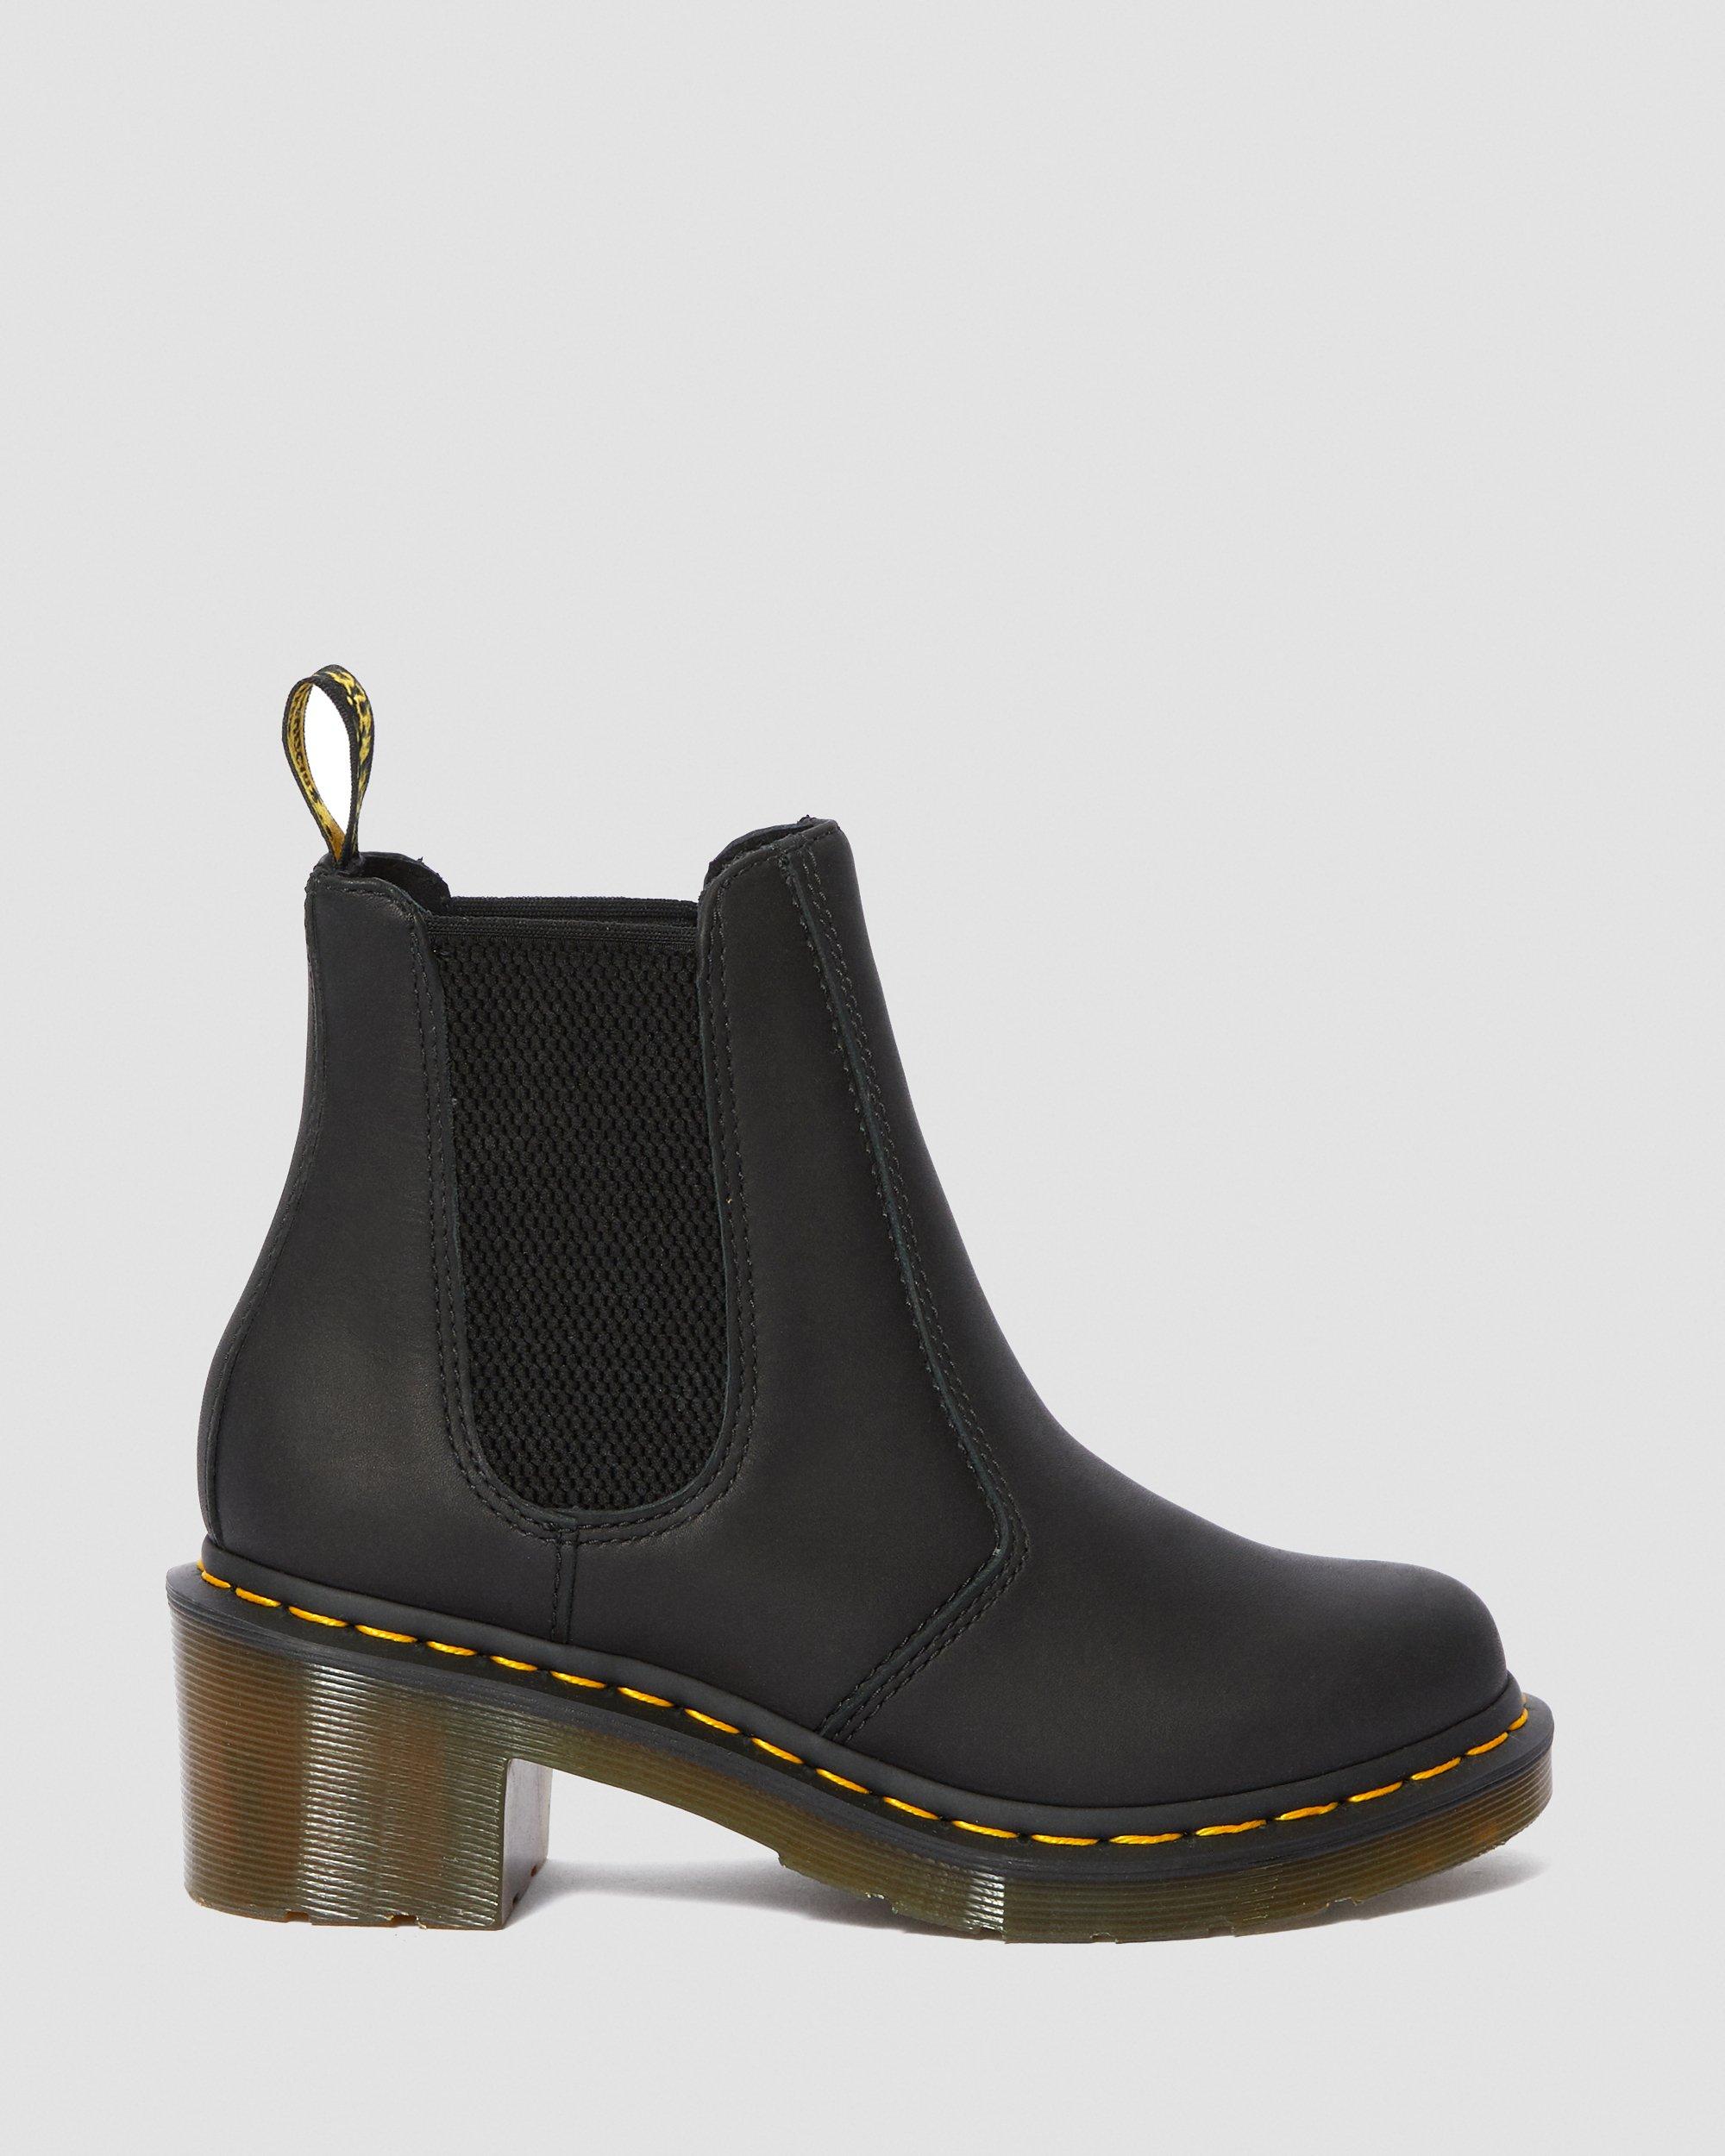 Cadence Greasy Heeled Chelsea Boots | Dr. Martens